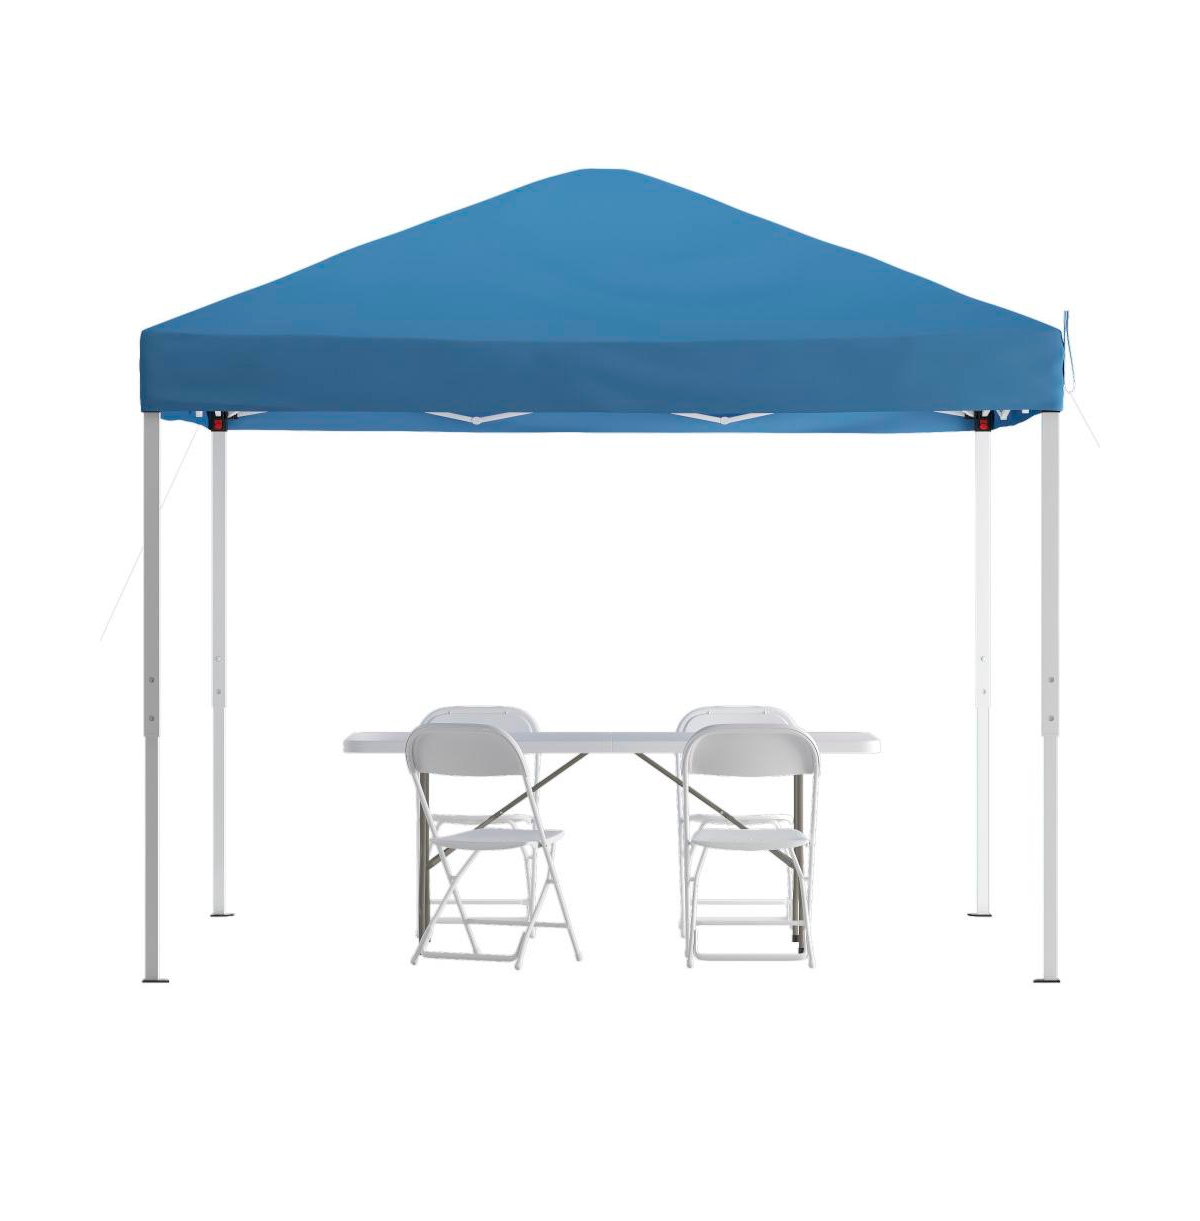 Outdoor Event/Tailgate Set With Pop Up Event Canopy With Carry Bag, Bi-Fold Table And 4 Folding Chairs - Blue